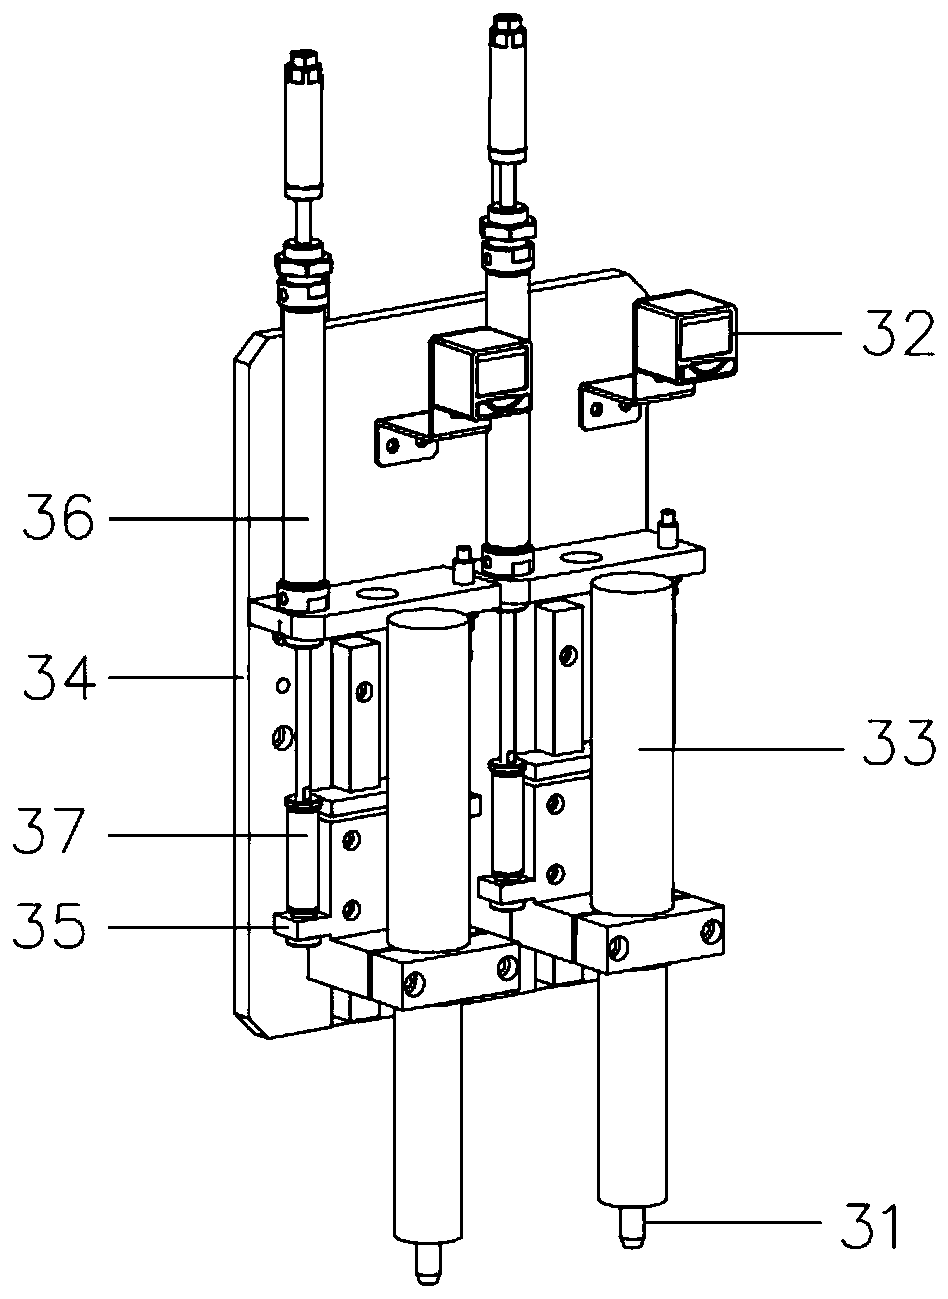 Mechanical arm mounting device used for gear frame